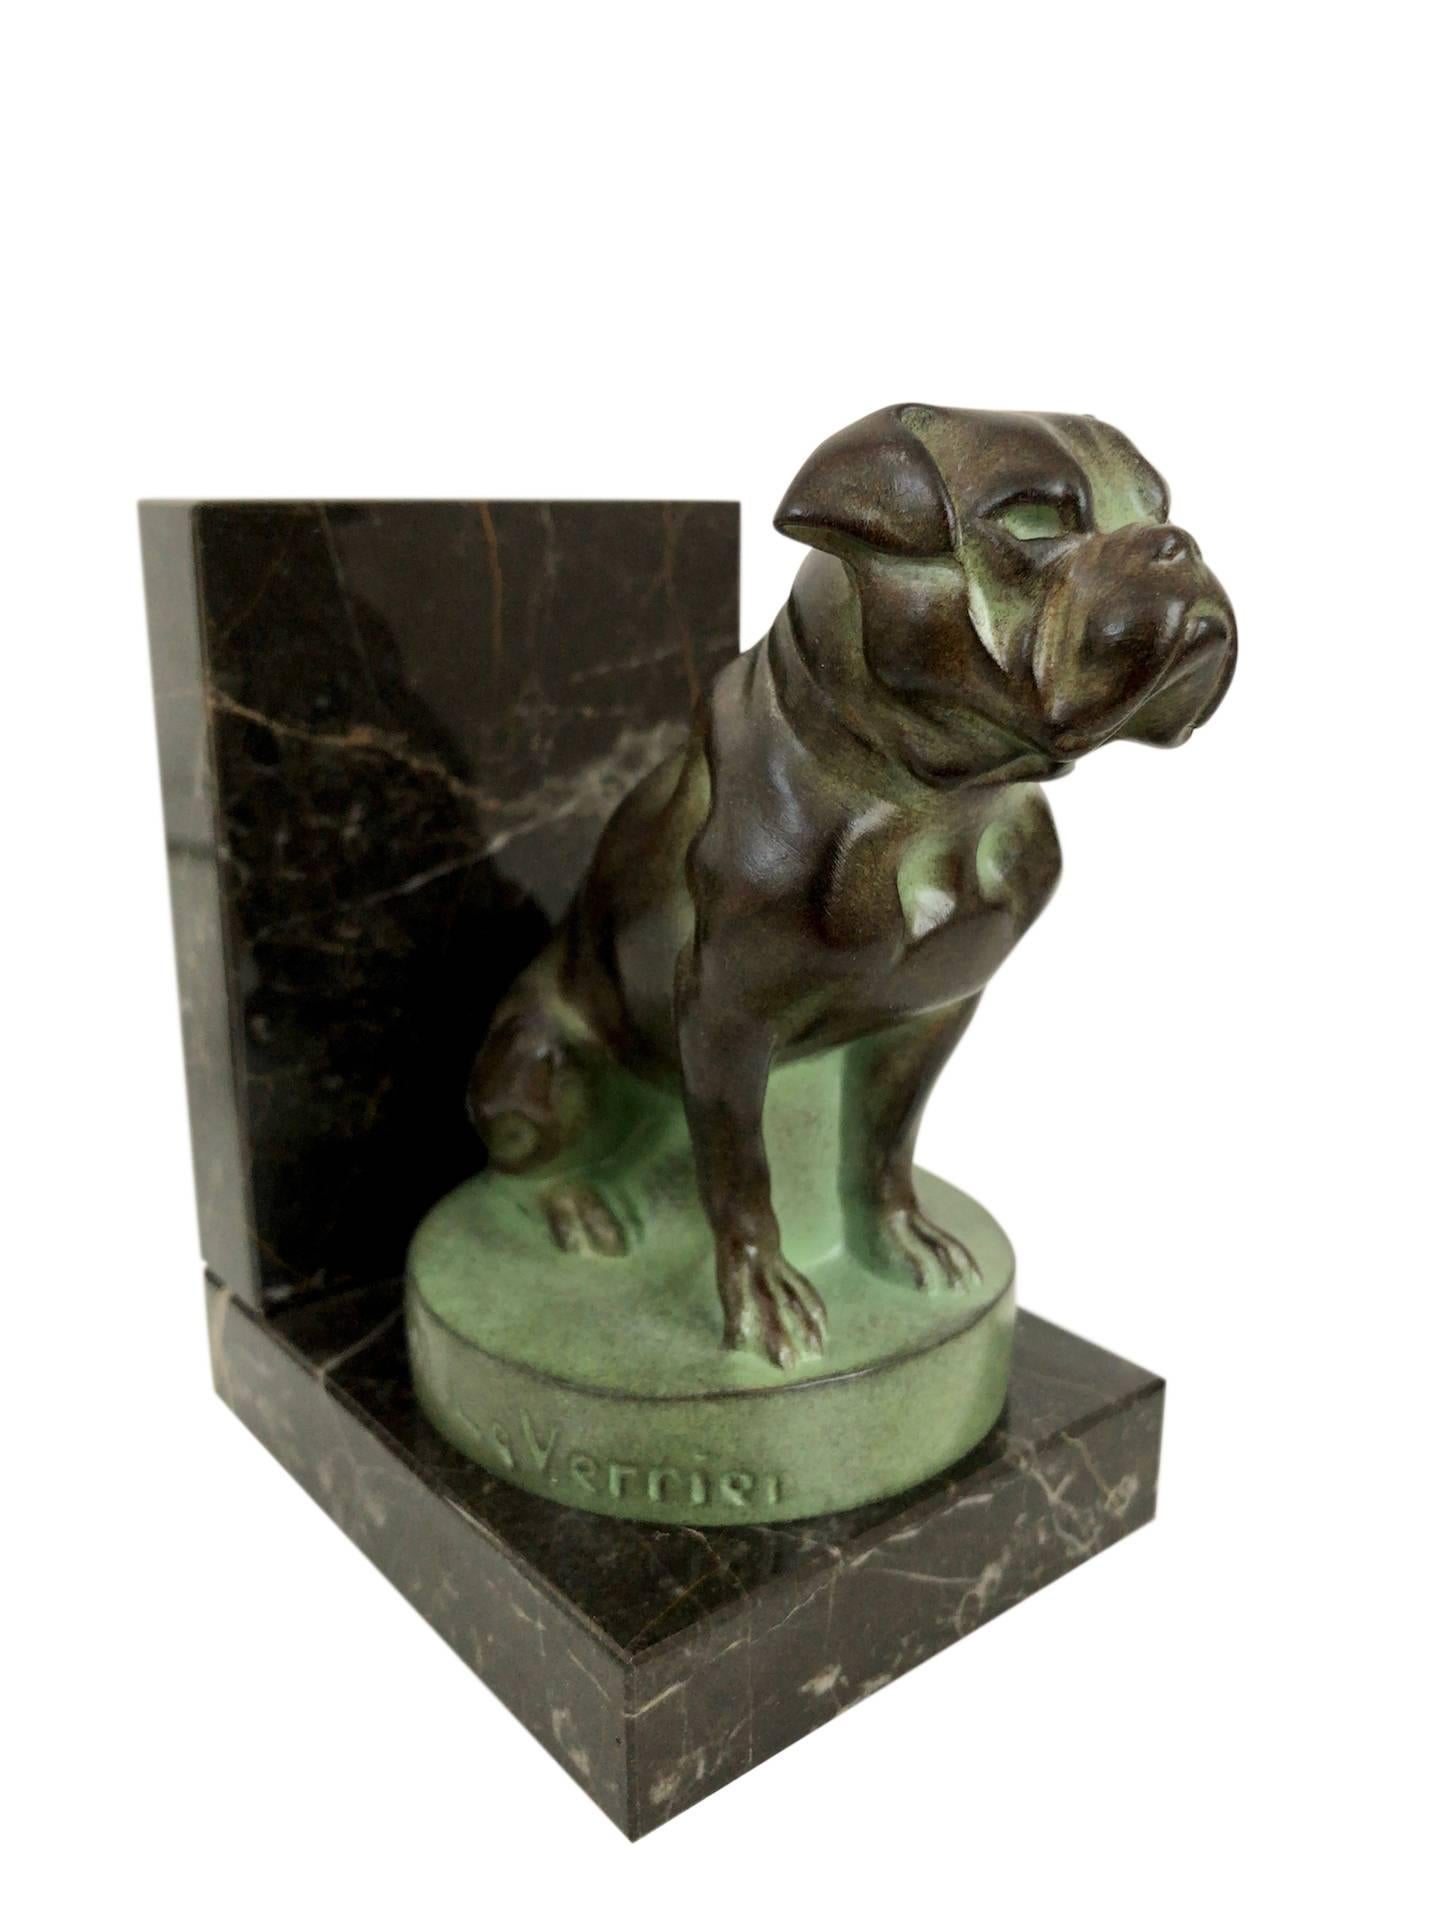 Contemporary Chat et Dogue Art Deco Bookends of a Cat and a Dog from Max Le Verrier